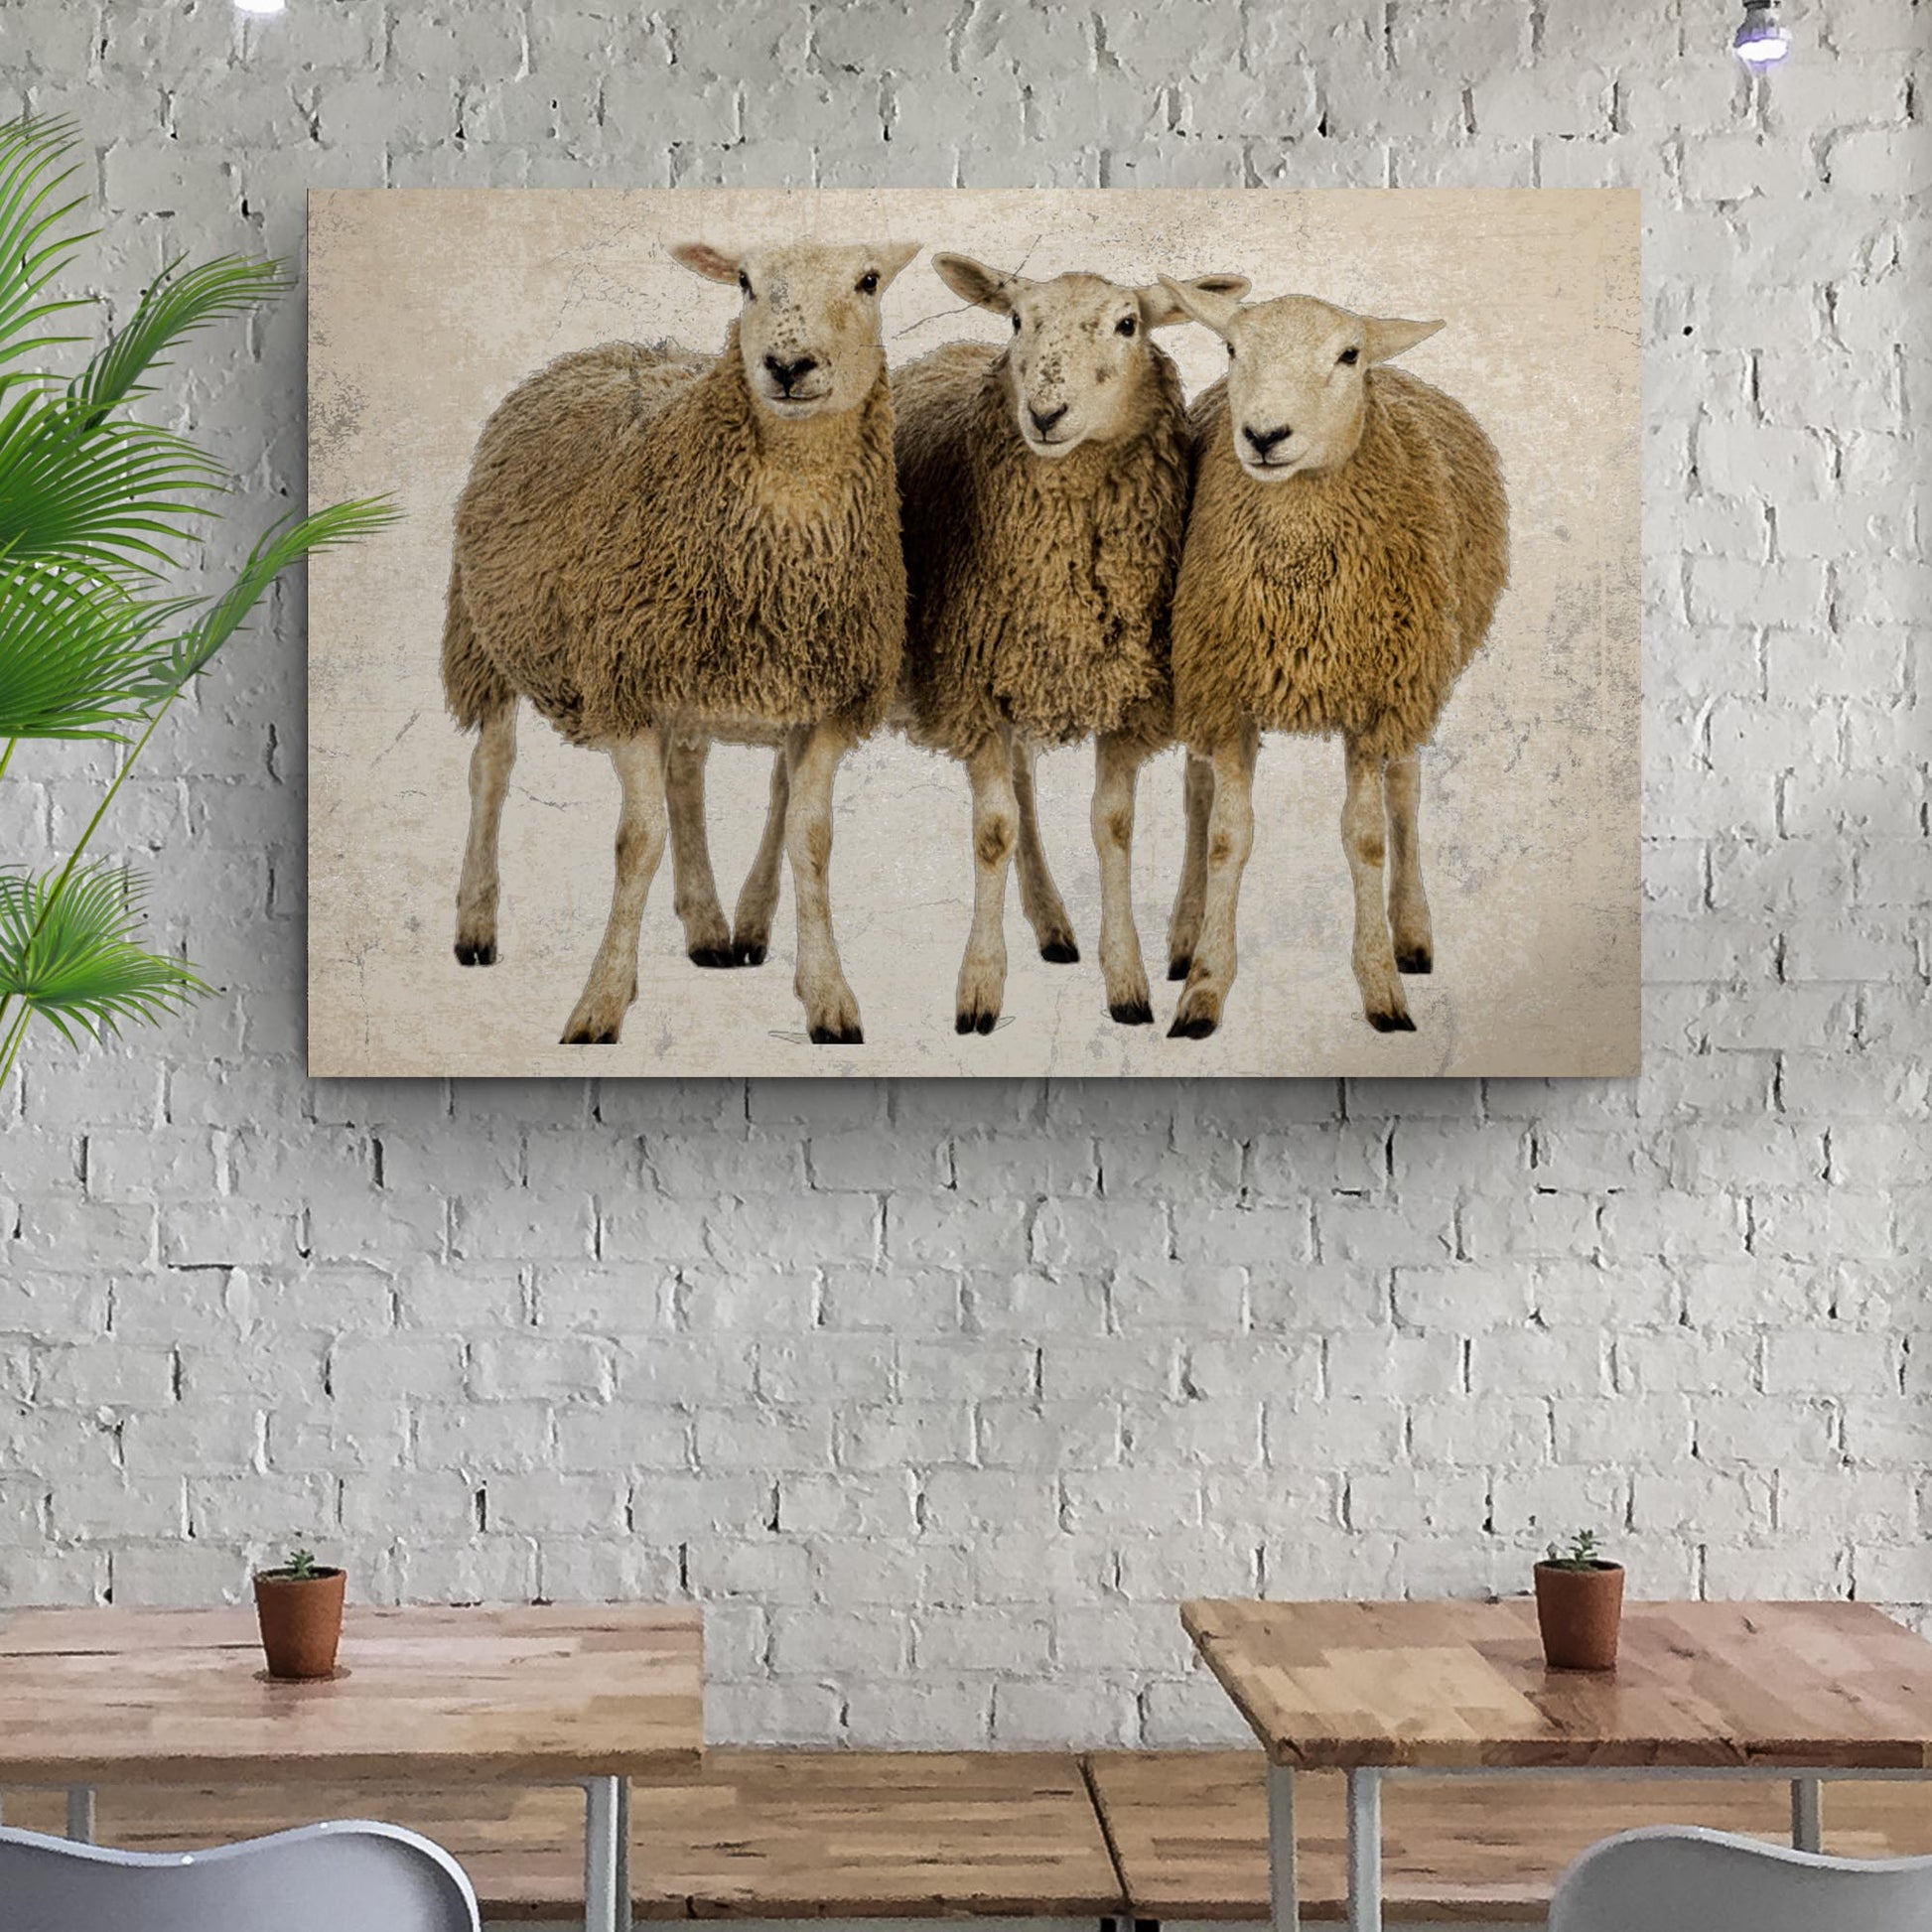 Rustic Sheep Herd Canvas Wall Art Style 2 - Image by Tailored Canvases